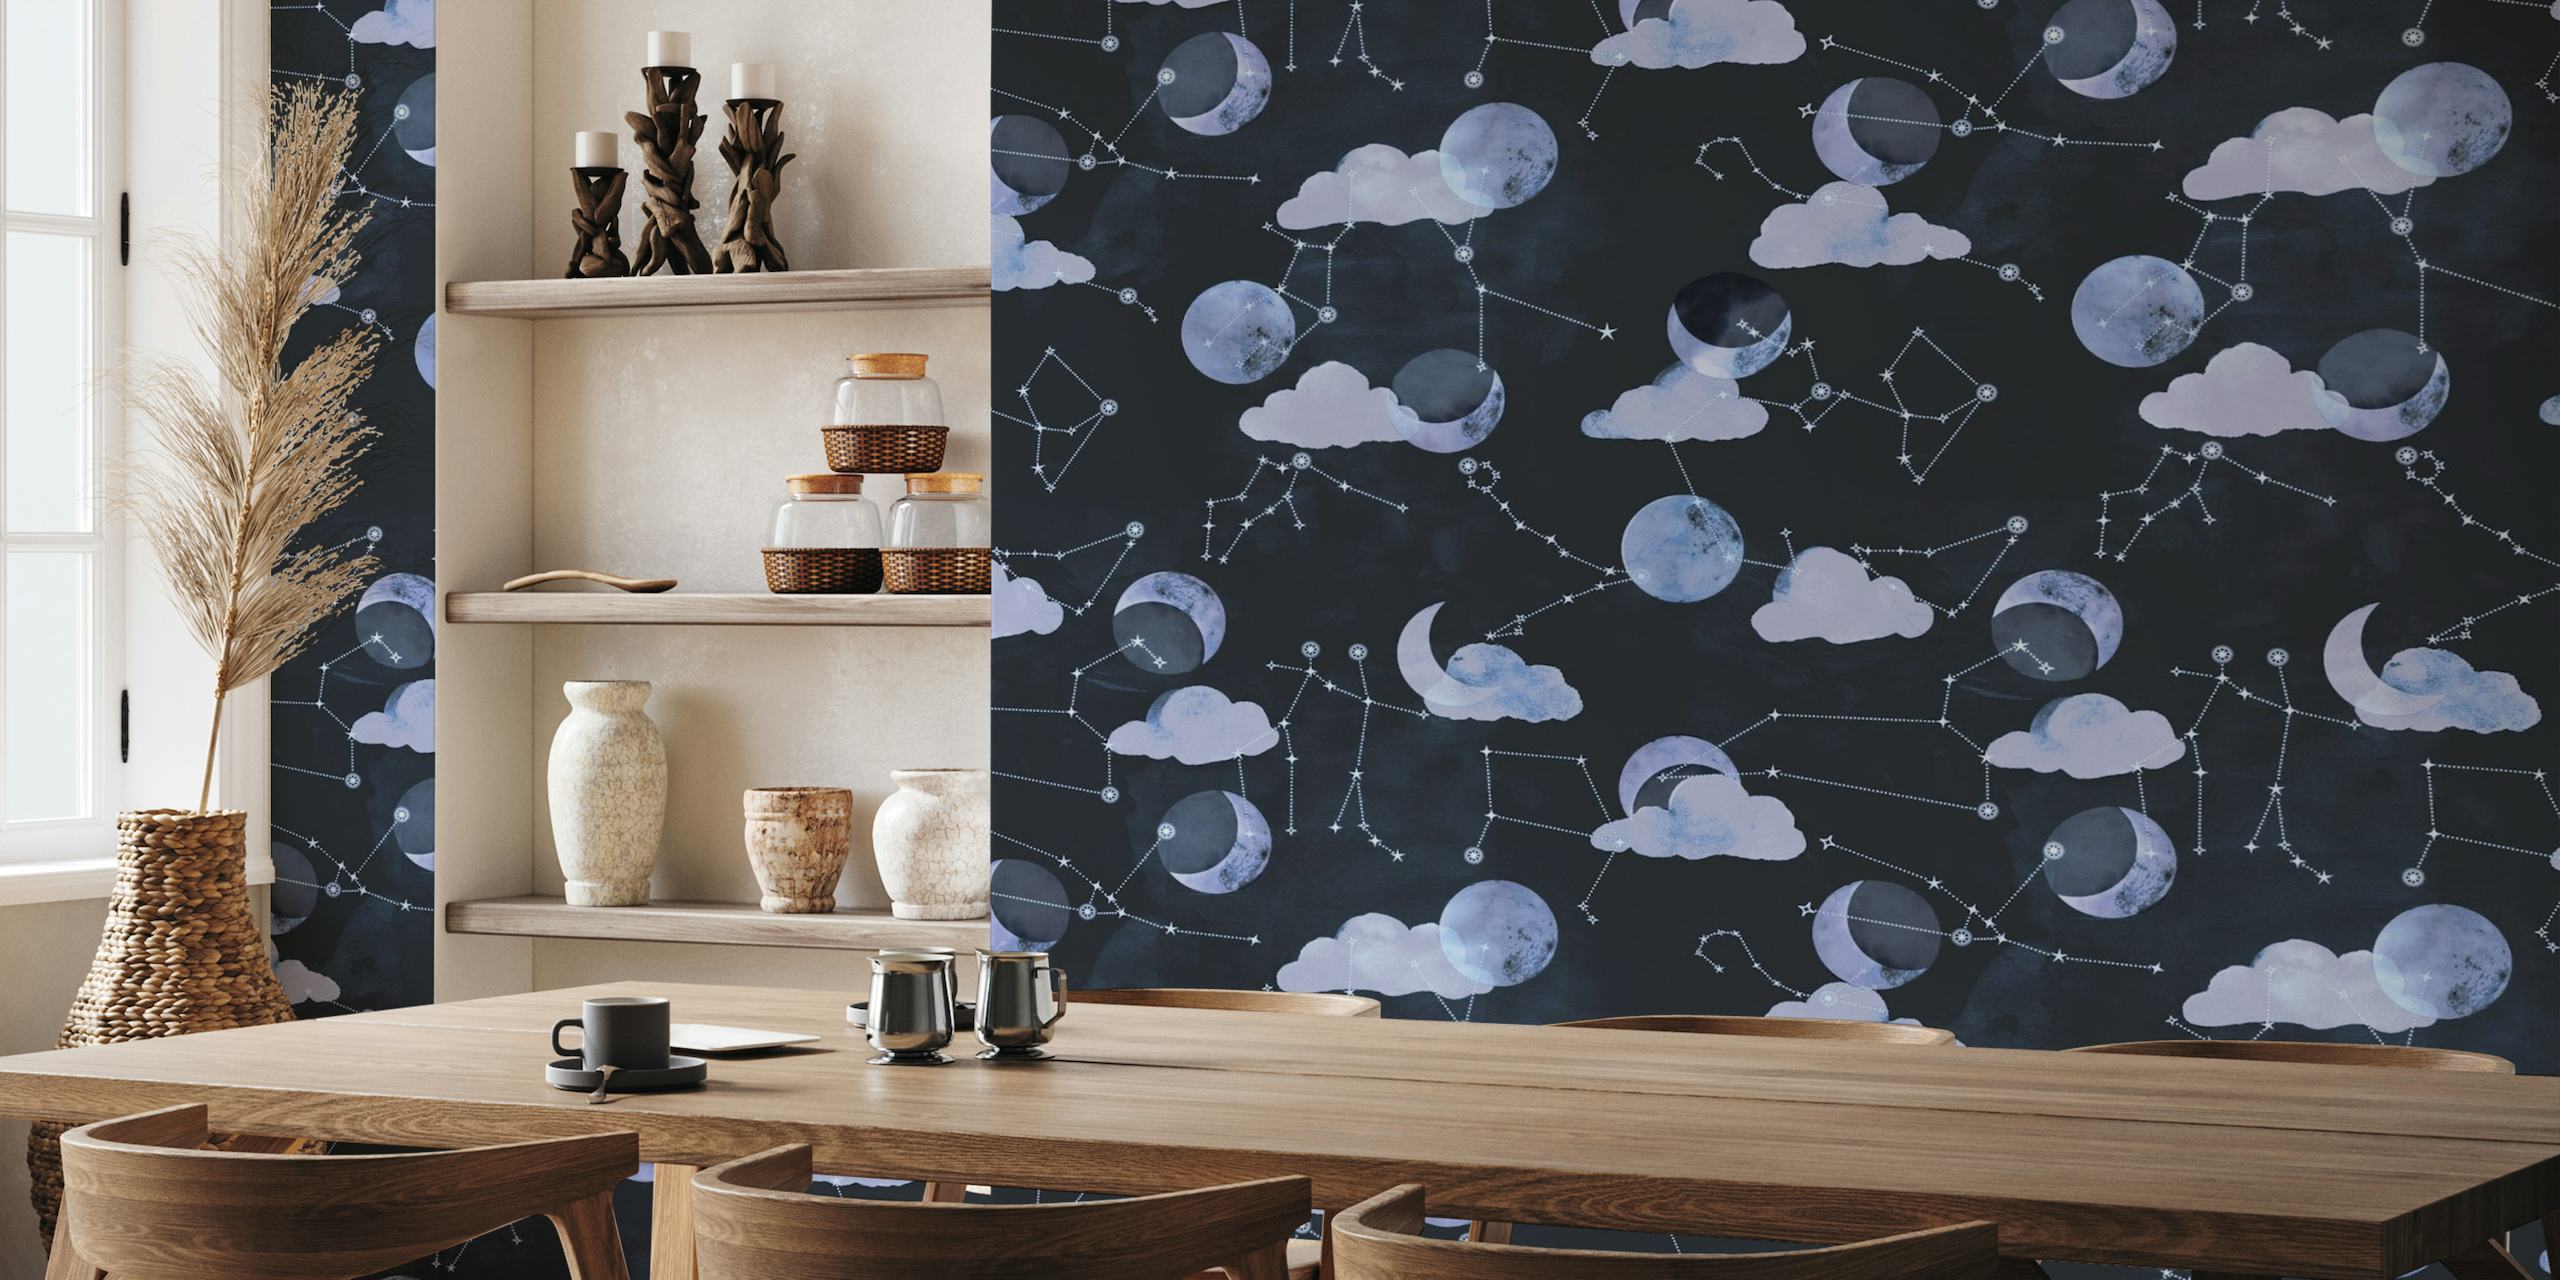 Moon and constellations wall mural featuring phases of the moon and star patterns against a dark night sky background.